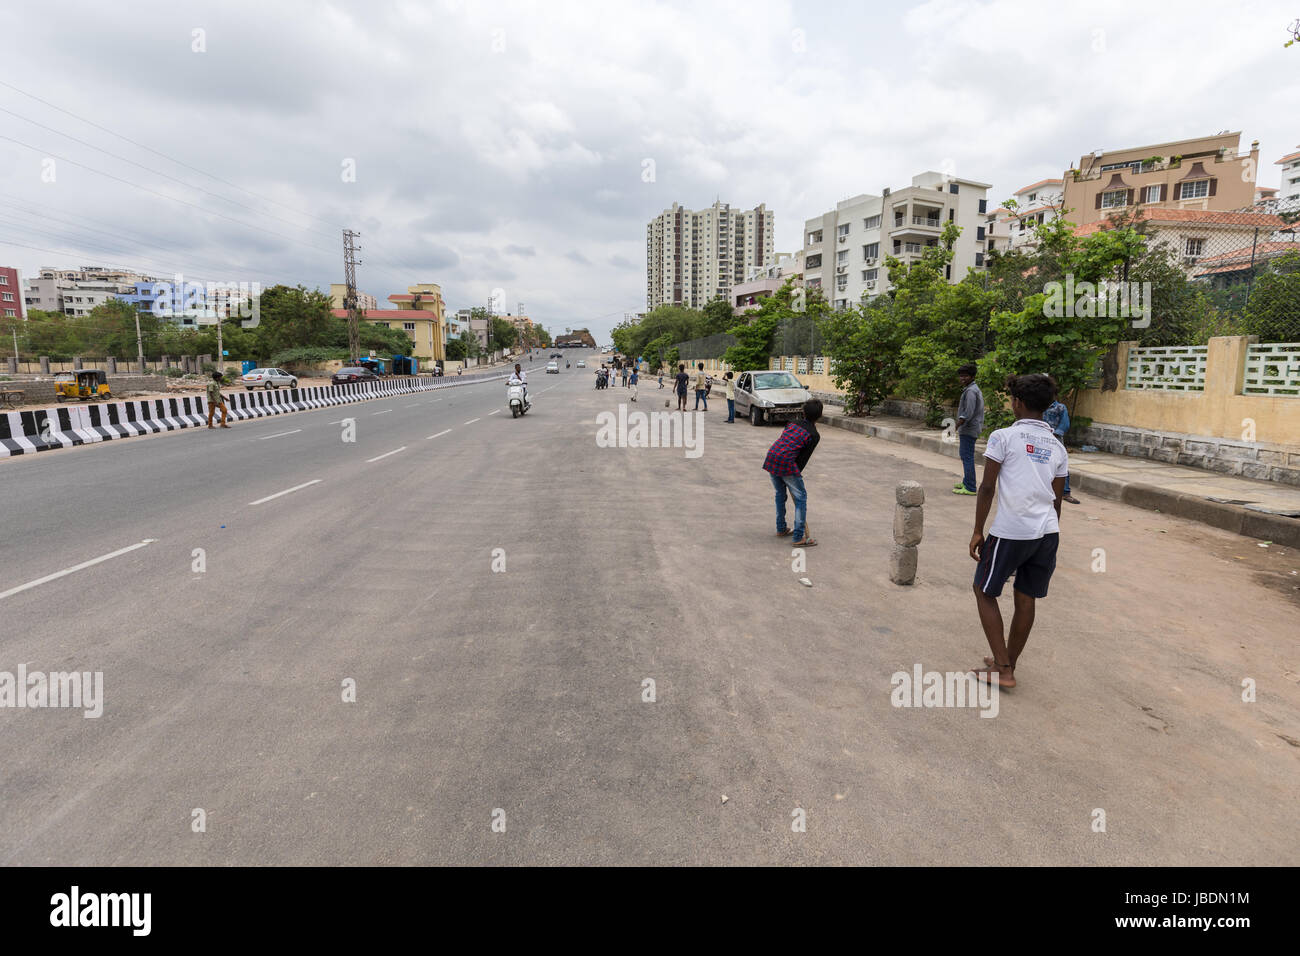 Indian kids playing cricket on a busy street in Hyderabad,India Stock Photo